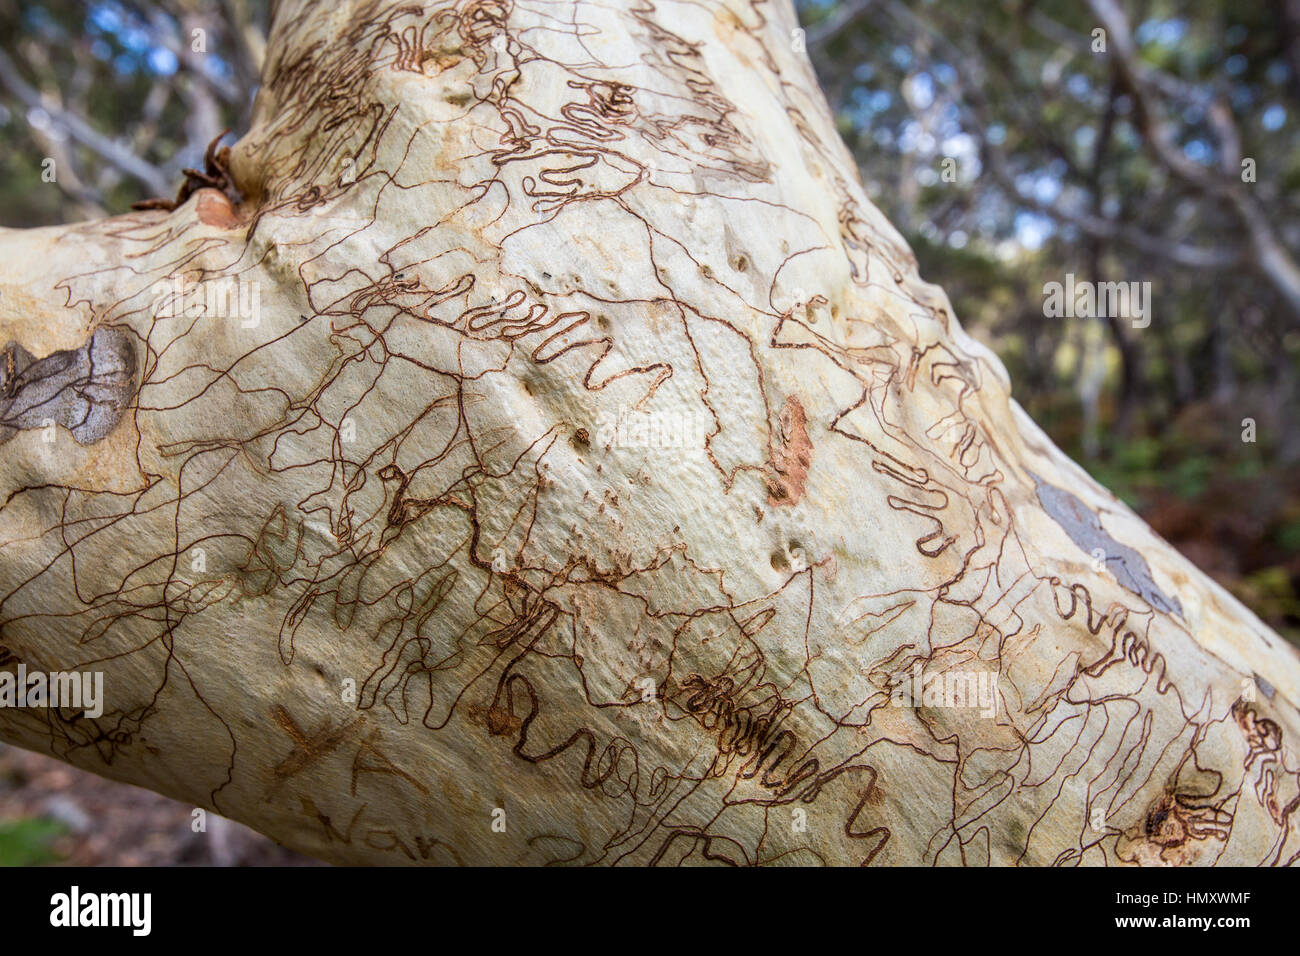 Close up of bark on a Scribbly Gum tree with distinctive markings from moths,Jervis Bay,Australia Stock Photo